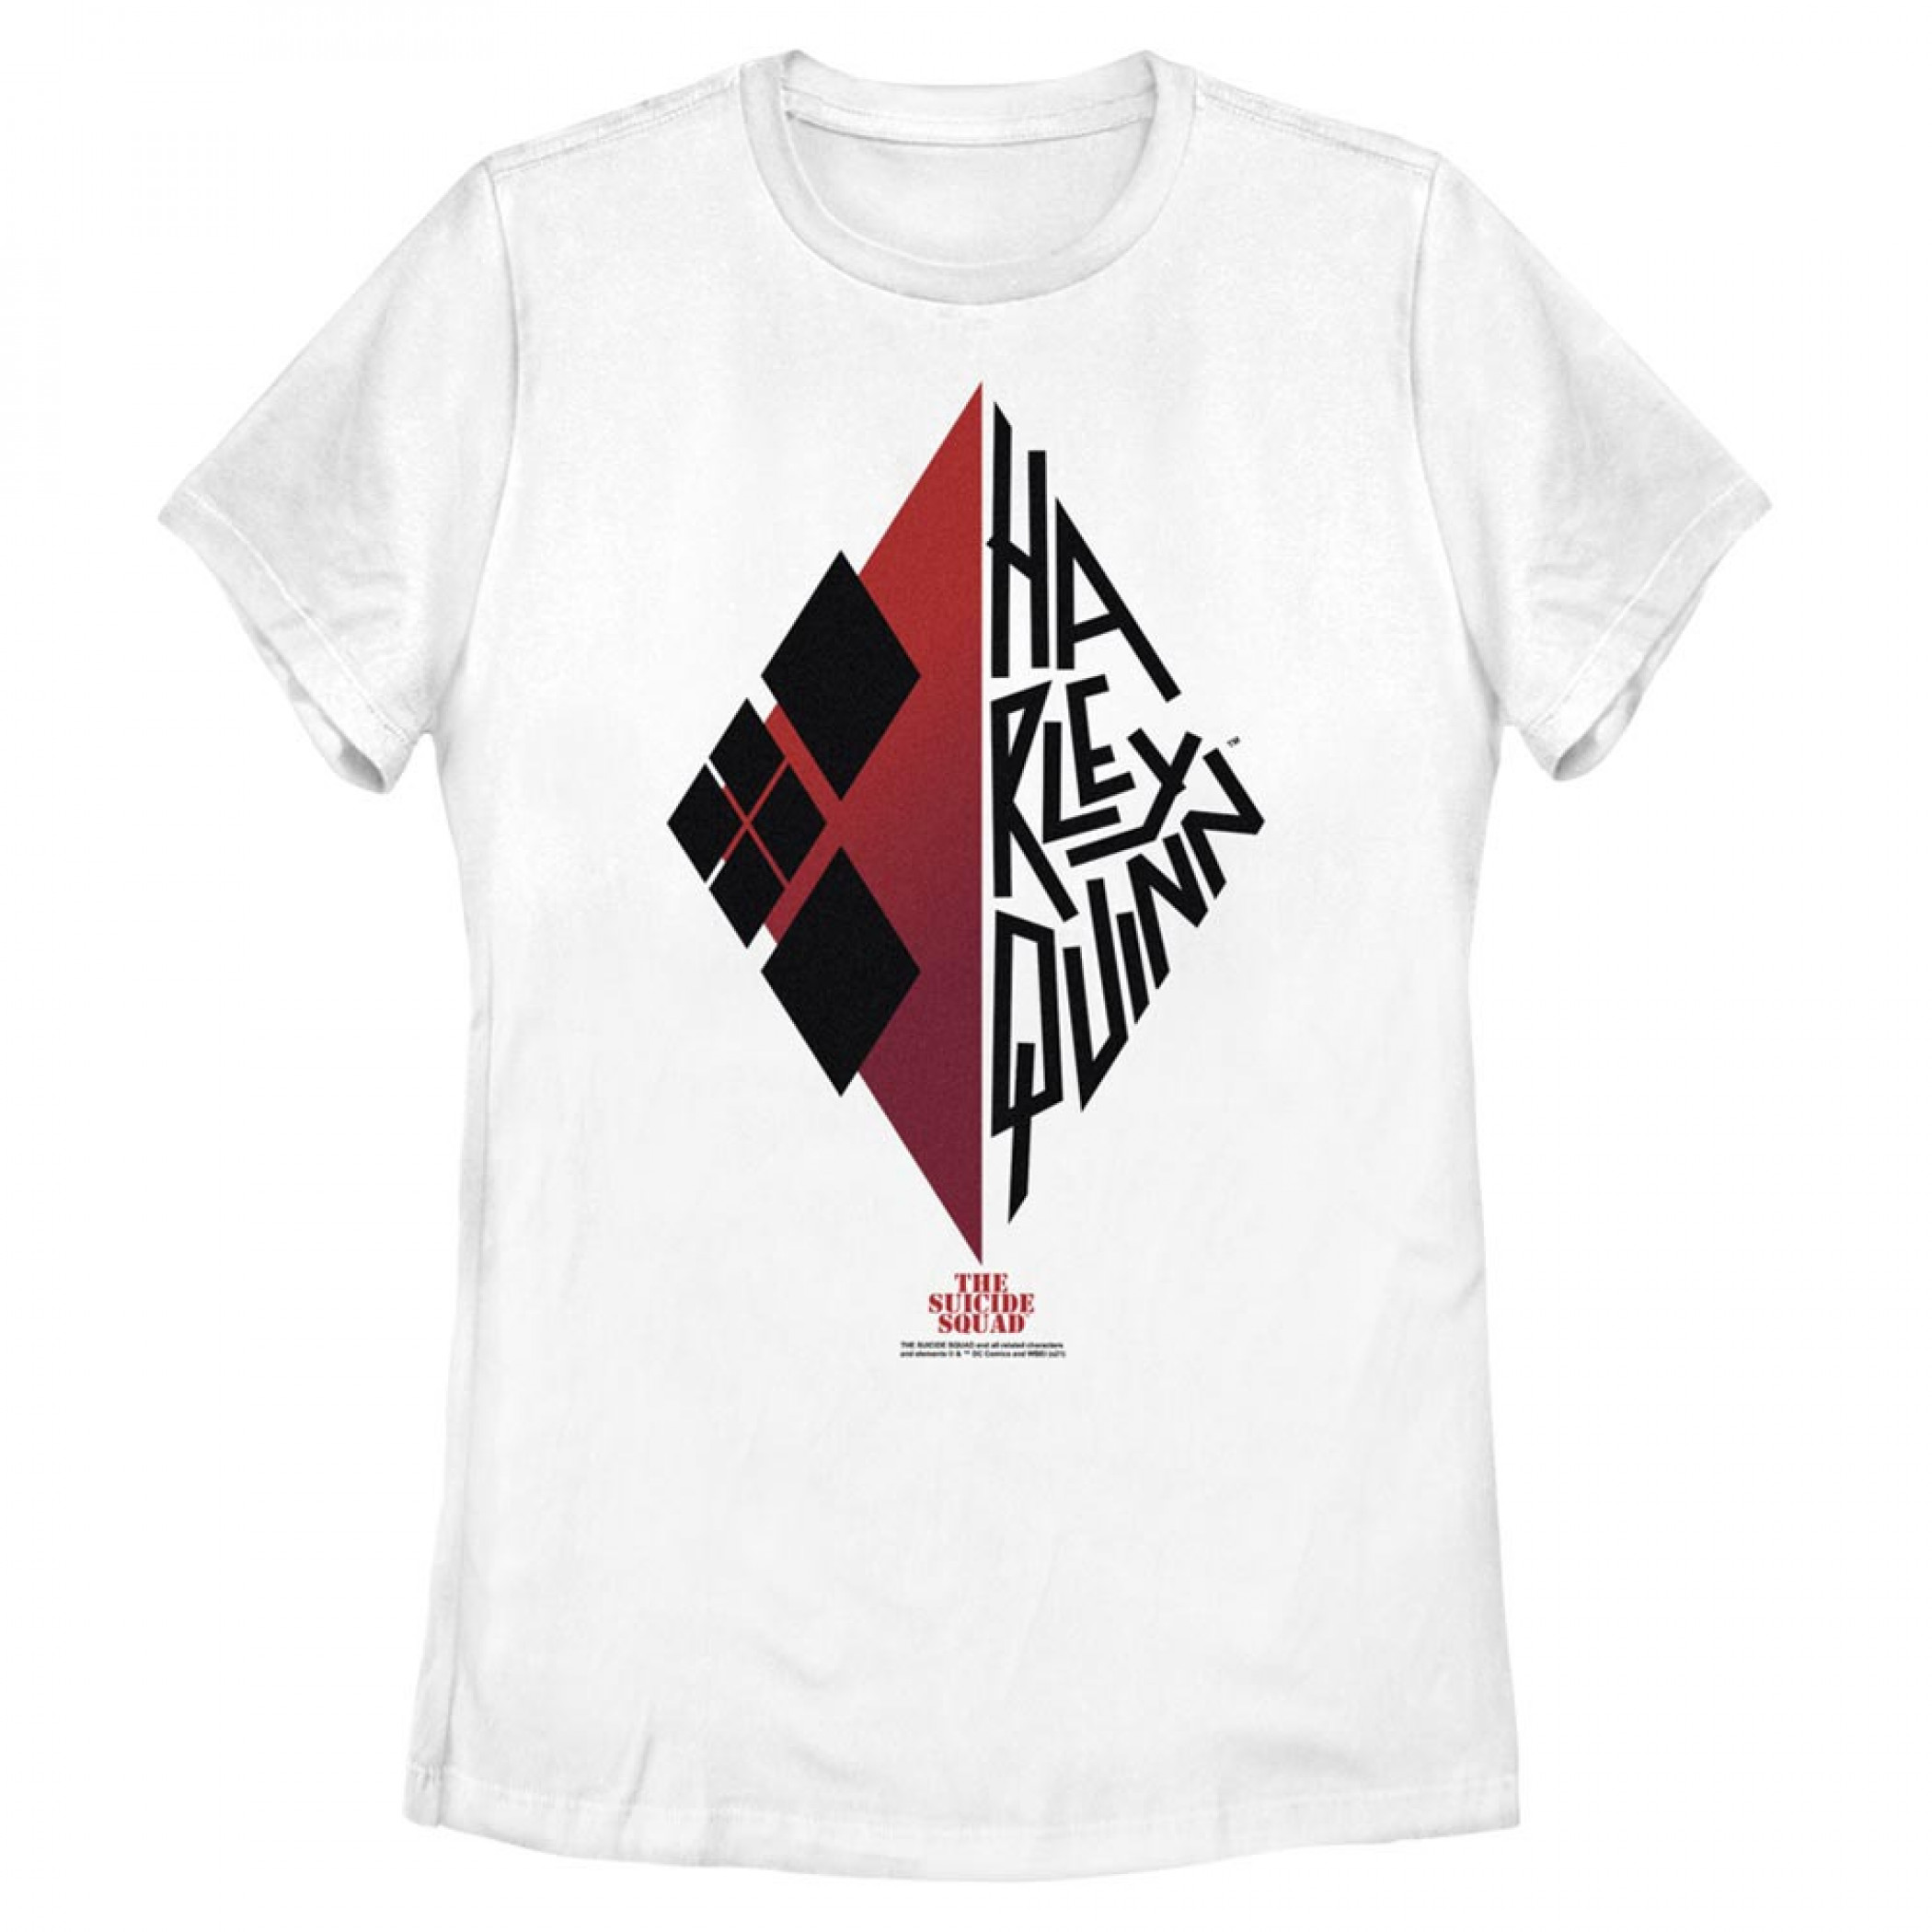 The Suicide Squad Harley Quinn Diamond and Text Juniors T-Shirt